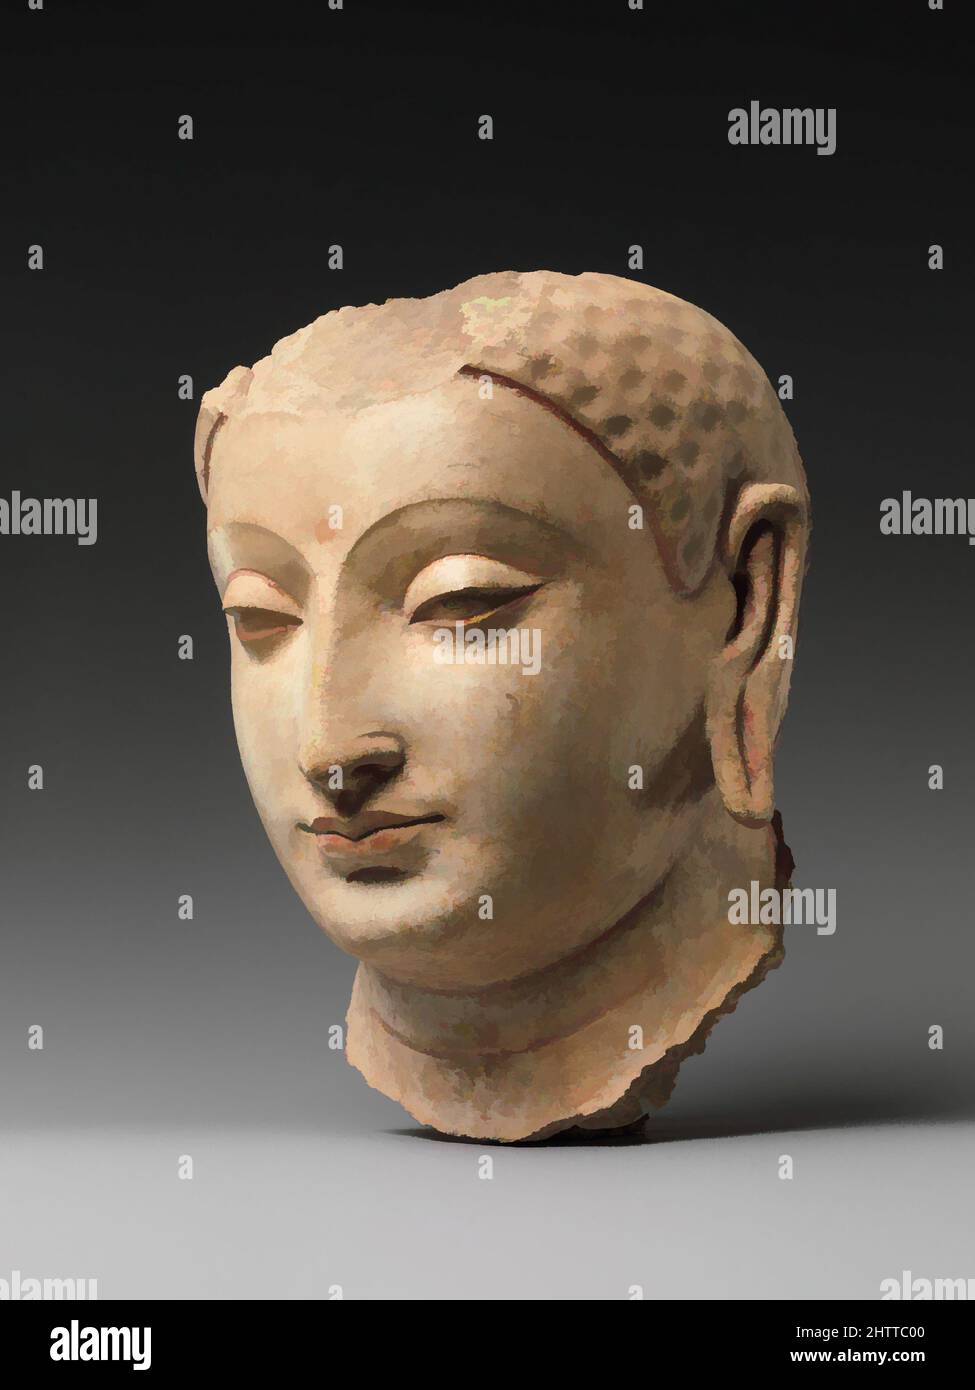 Art inspired by Head of Buddha, 5th–6th century, Afghanistan (probably Hadda), Stucco with traces of paint, H. 7 1/4 in. (18.4 cm), Sculpture, The well-preserved surface and traces of paint provide an idea of what this head looked like when it was being used in worship. The abstracted, Classic works modernized by Artotop with a splash of modernity. Shapes, color and value, eye-catching visual impact on art. Emotions through freedom of artworks in a contemporary way. A timeless message pursuing a wildly creative new direction. Artists turning to the digital medium and creating the Artotop NFT Stock Photo